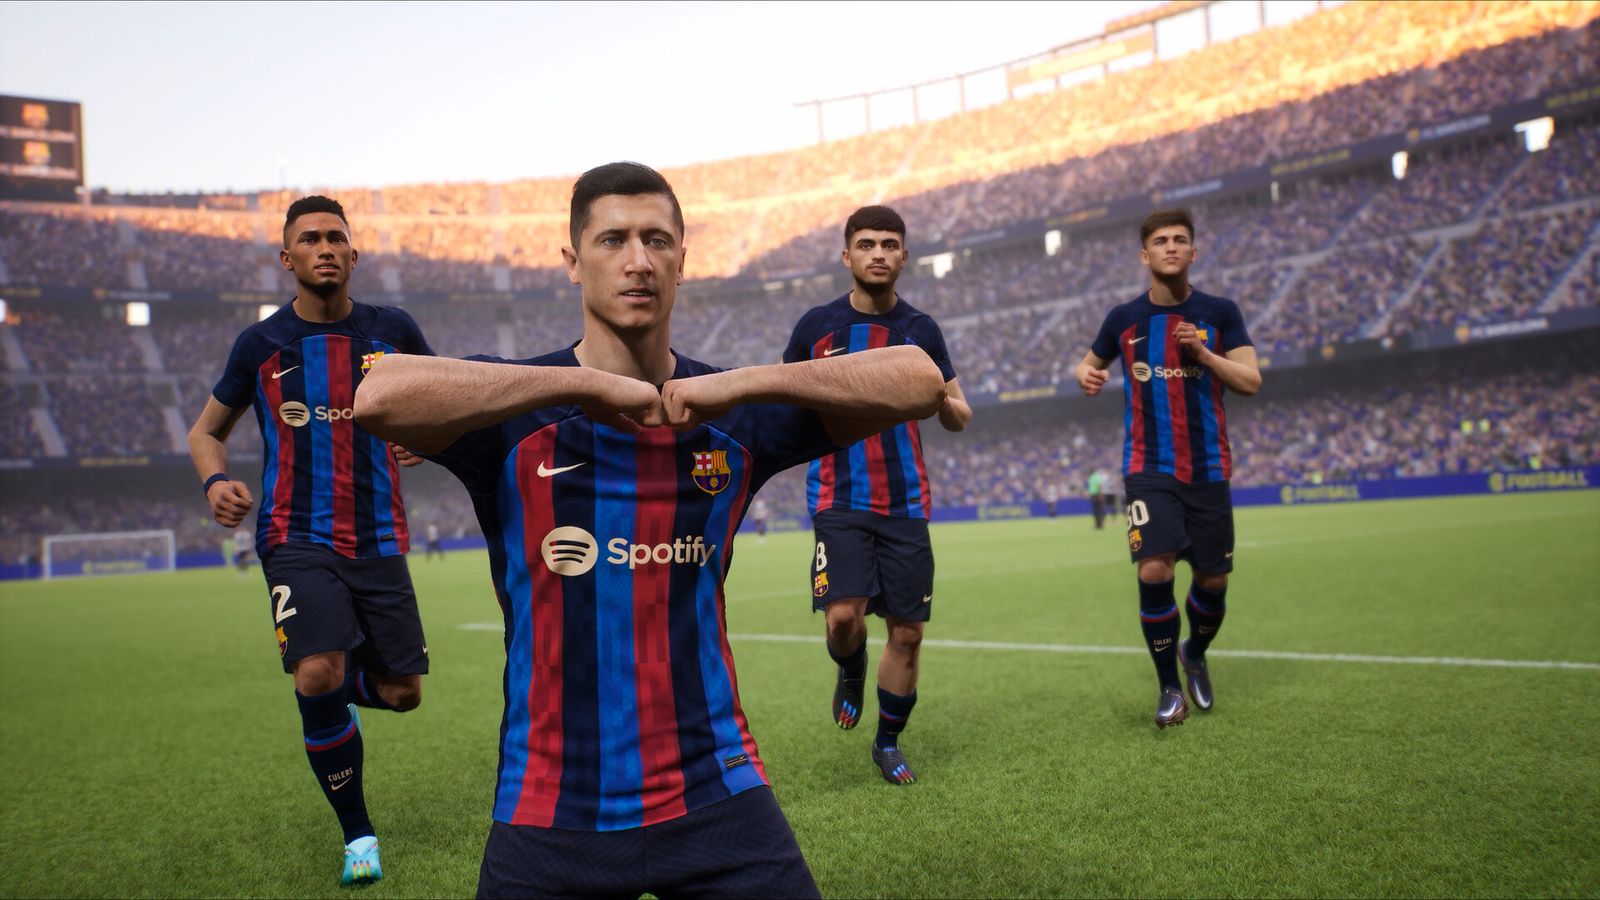 eFootball in-game image of Lewandowski celebrating wearing the red, blue, and navy striped Barcelona kit.